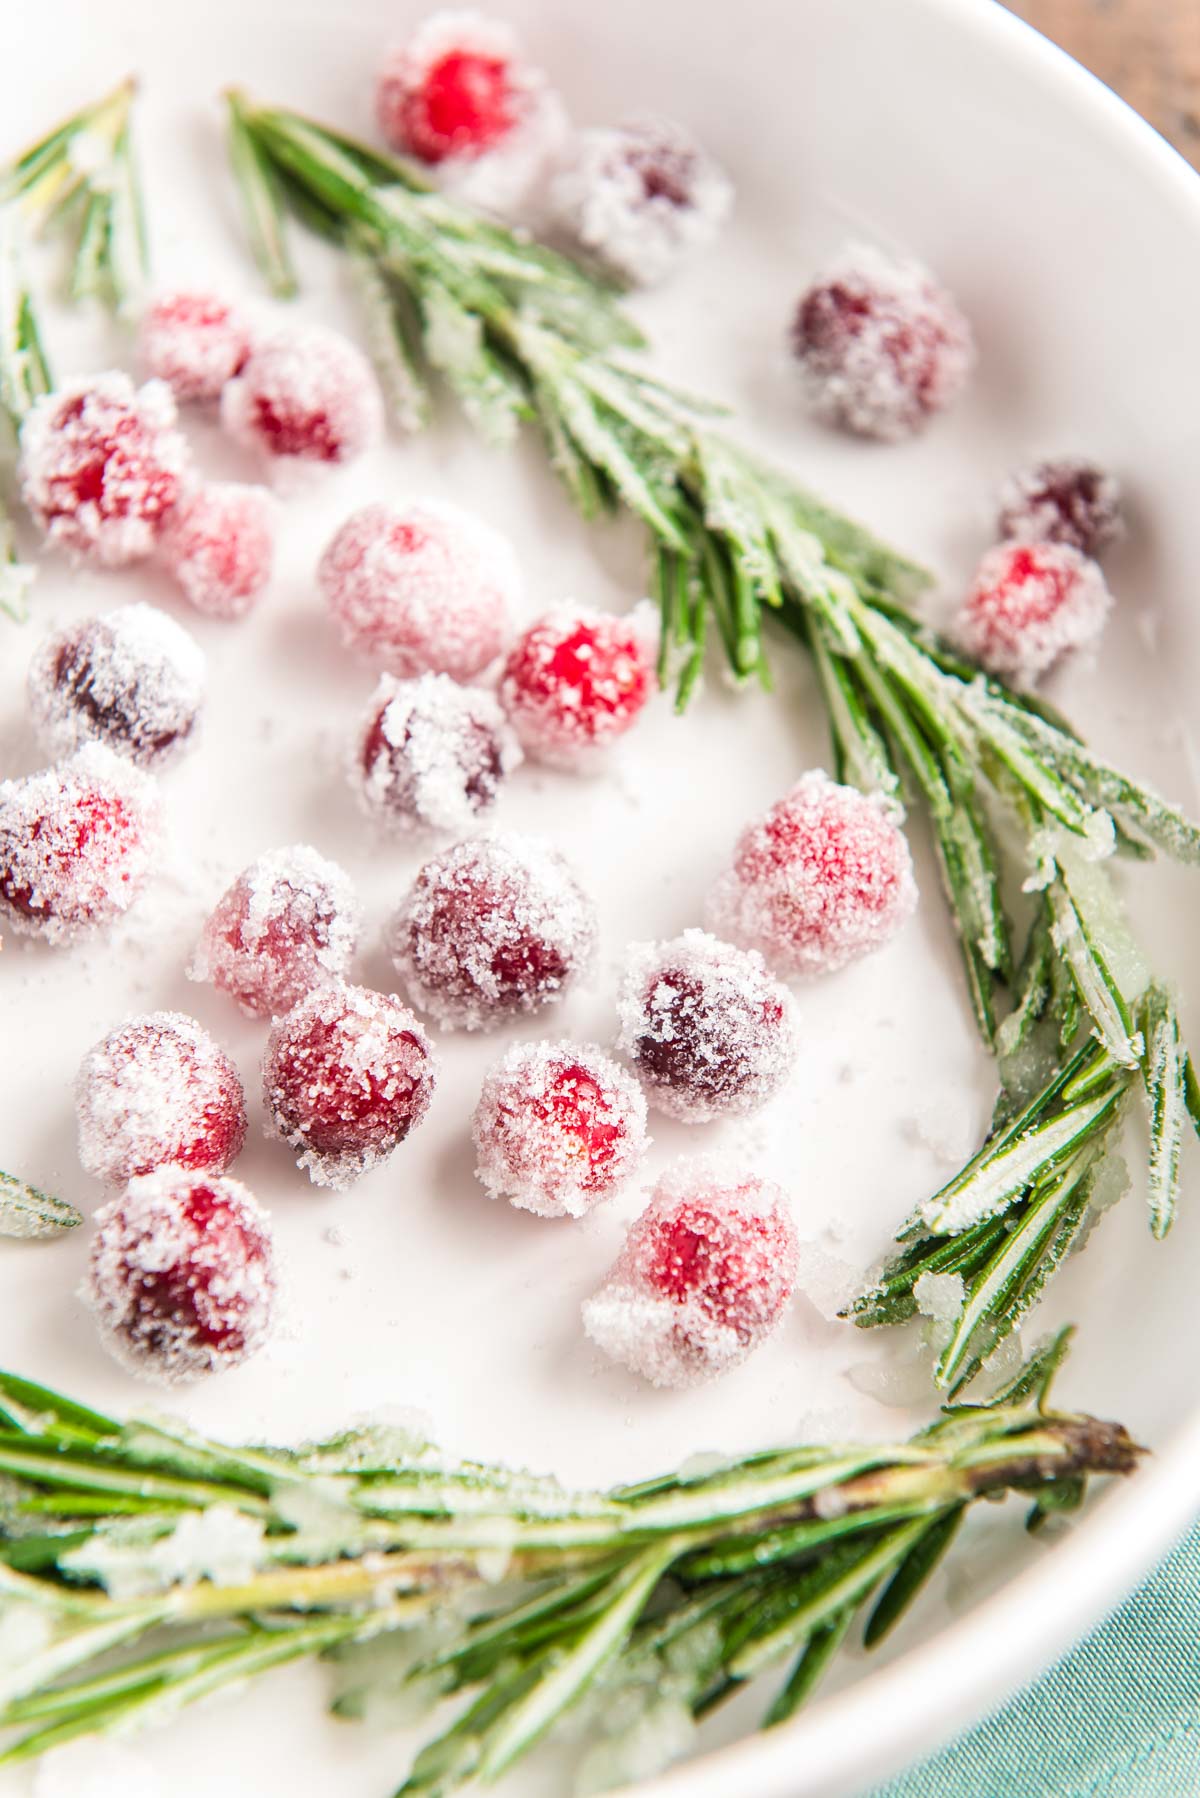 Cranberries and rosemary dipping in simple syrup and sugar.